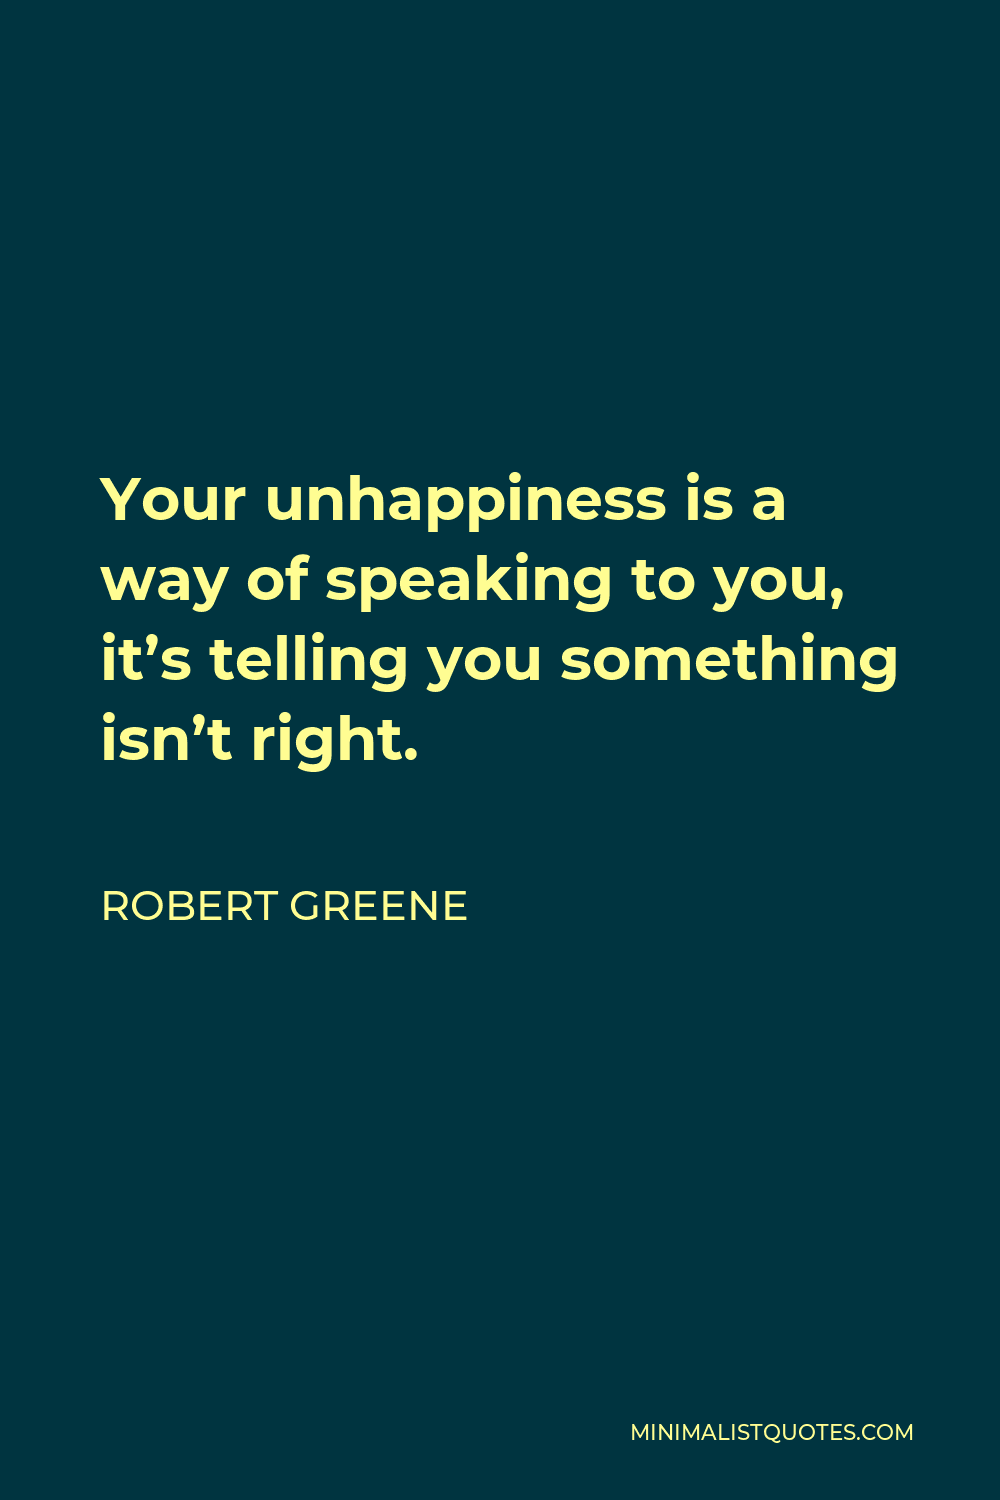 Robert Greene Quote - Your unhappiness is a way of speaking to you, it’s telling you something isn’t right.